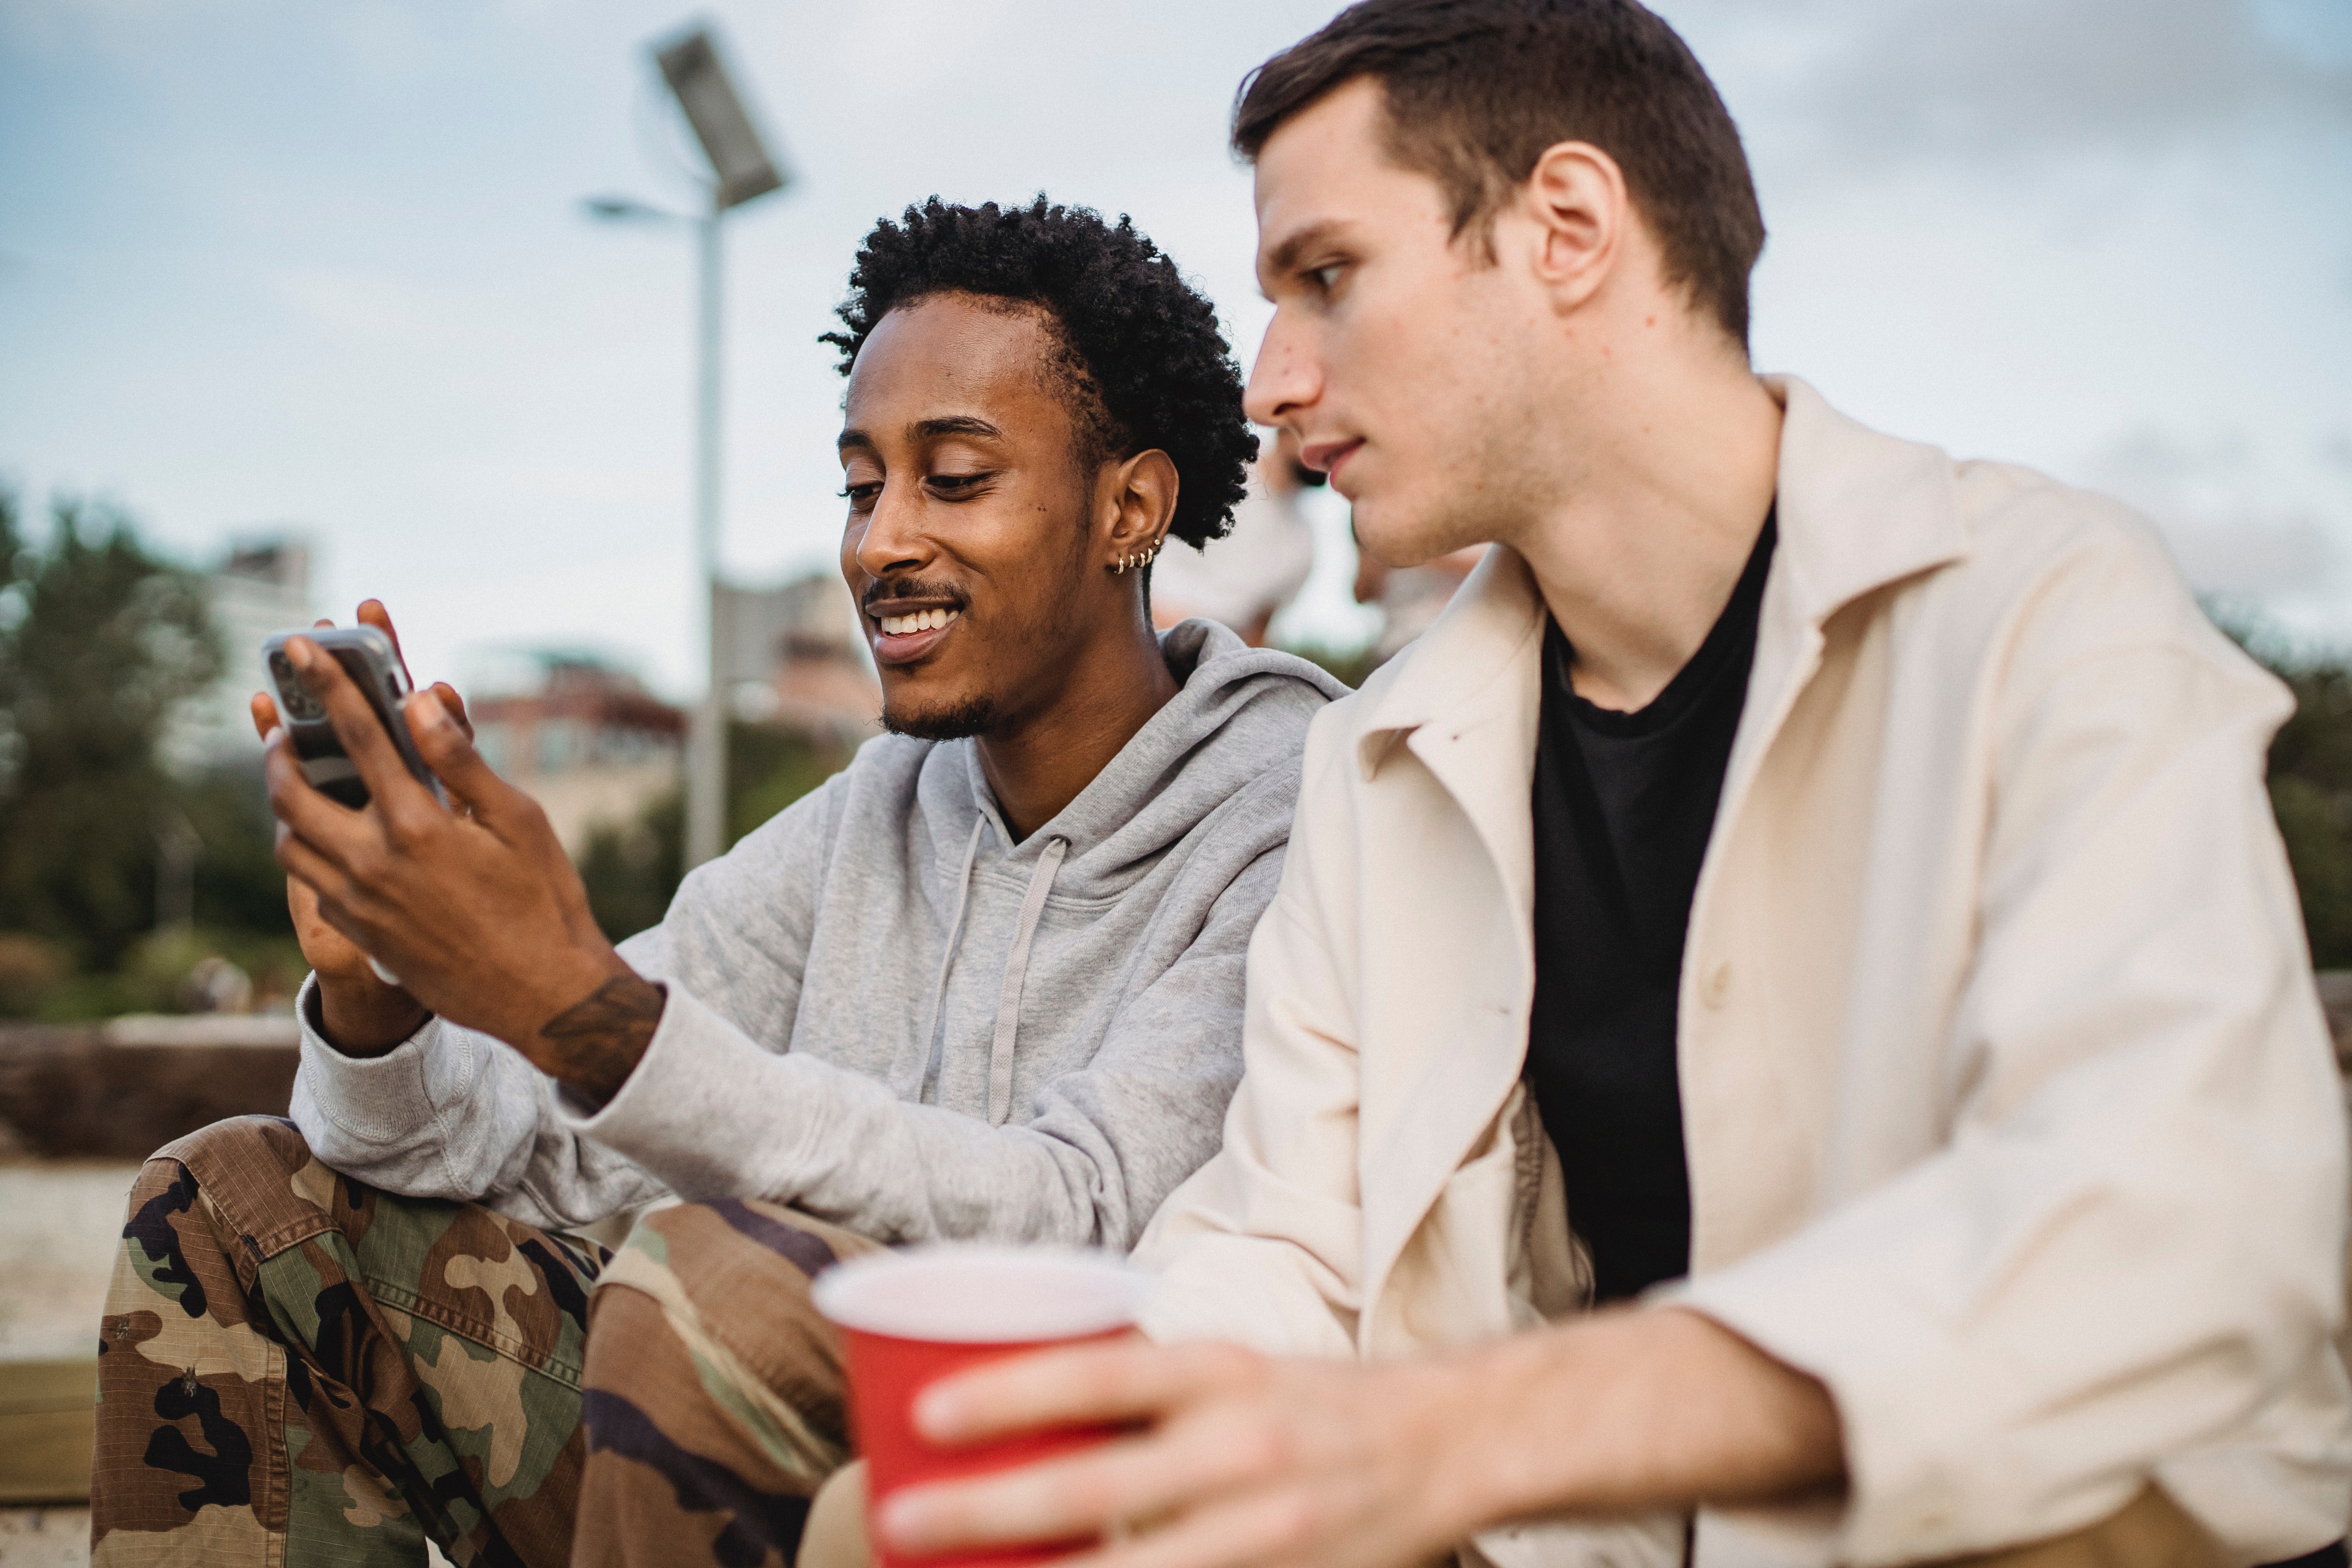 Cheerful man showing his phone to a friend  | Photo: Pexels